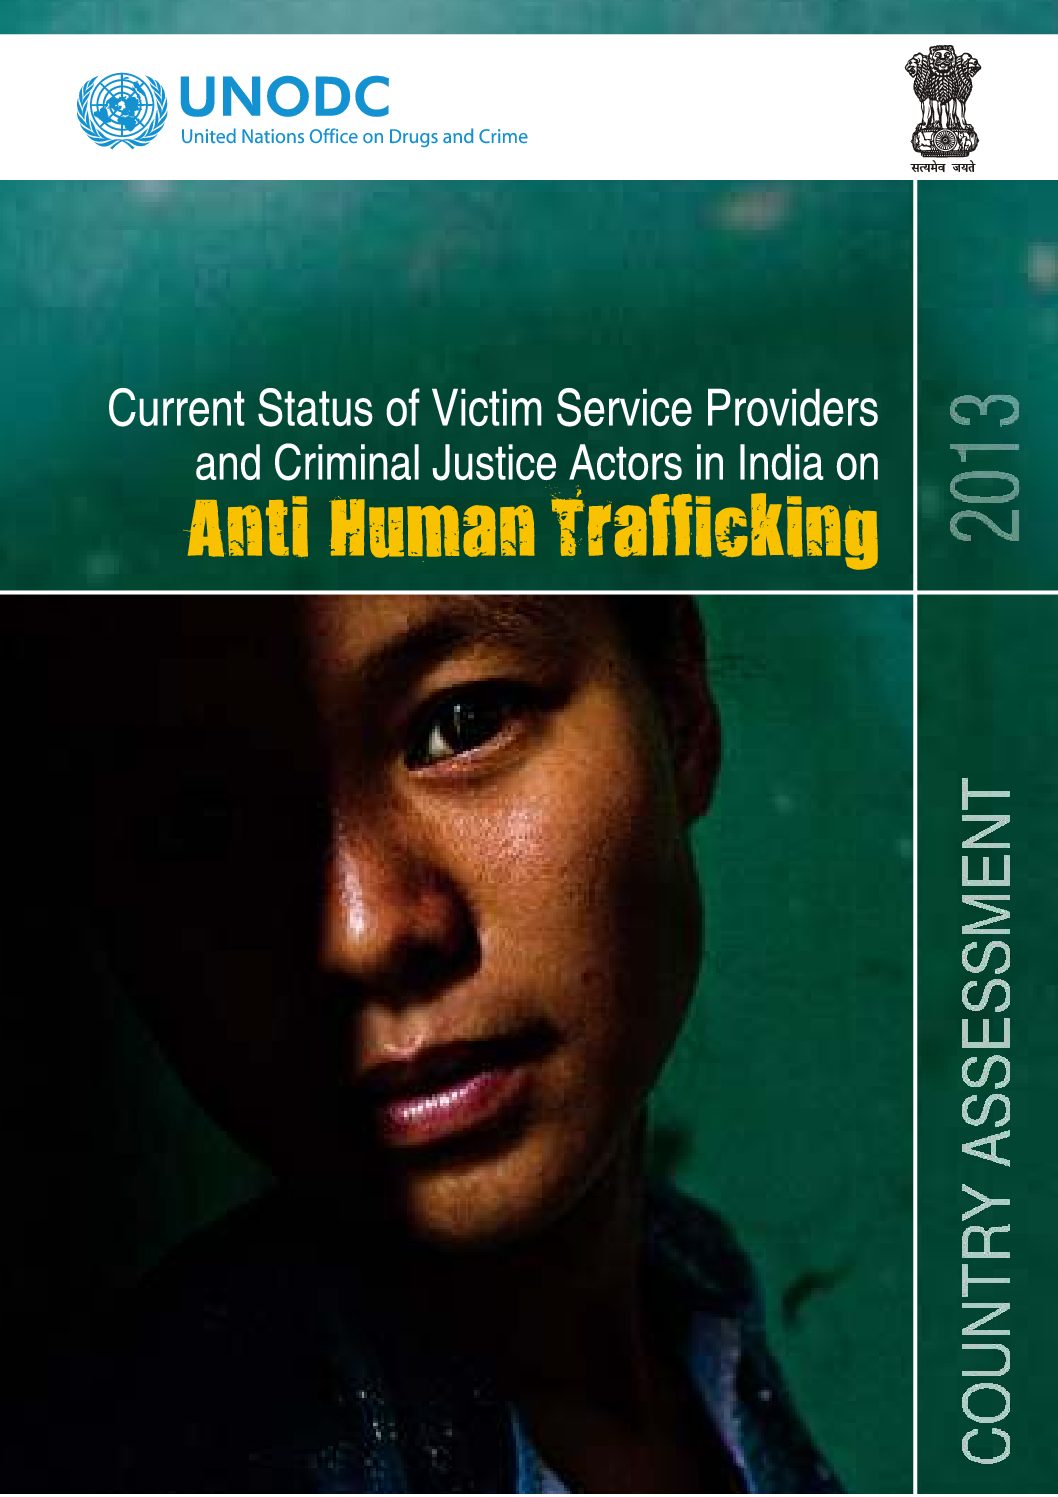 India Country Assessment Report: Current Status of Victim Service Providers and Criminal Justice Actors on Anti Human Trafficking